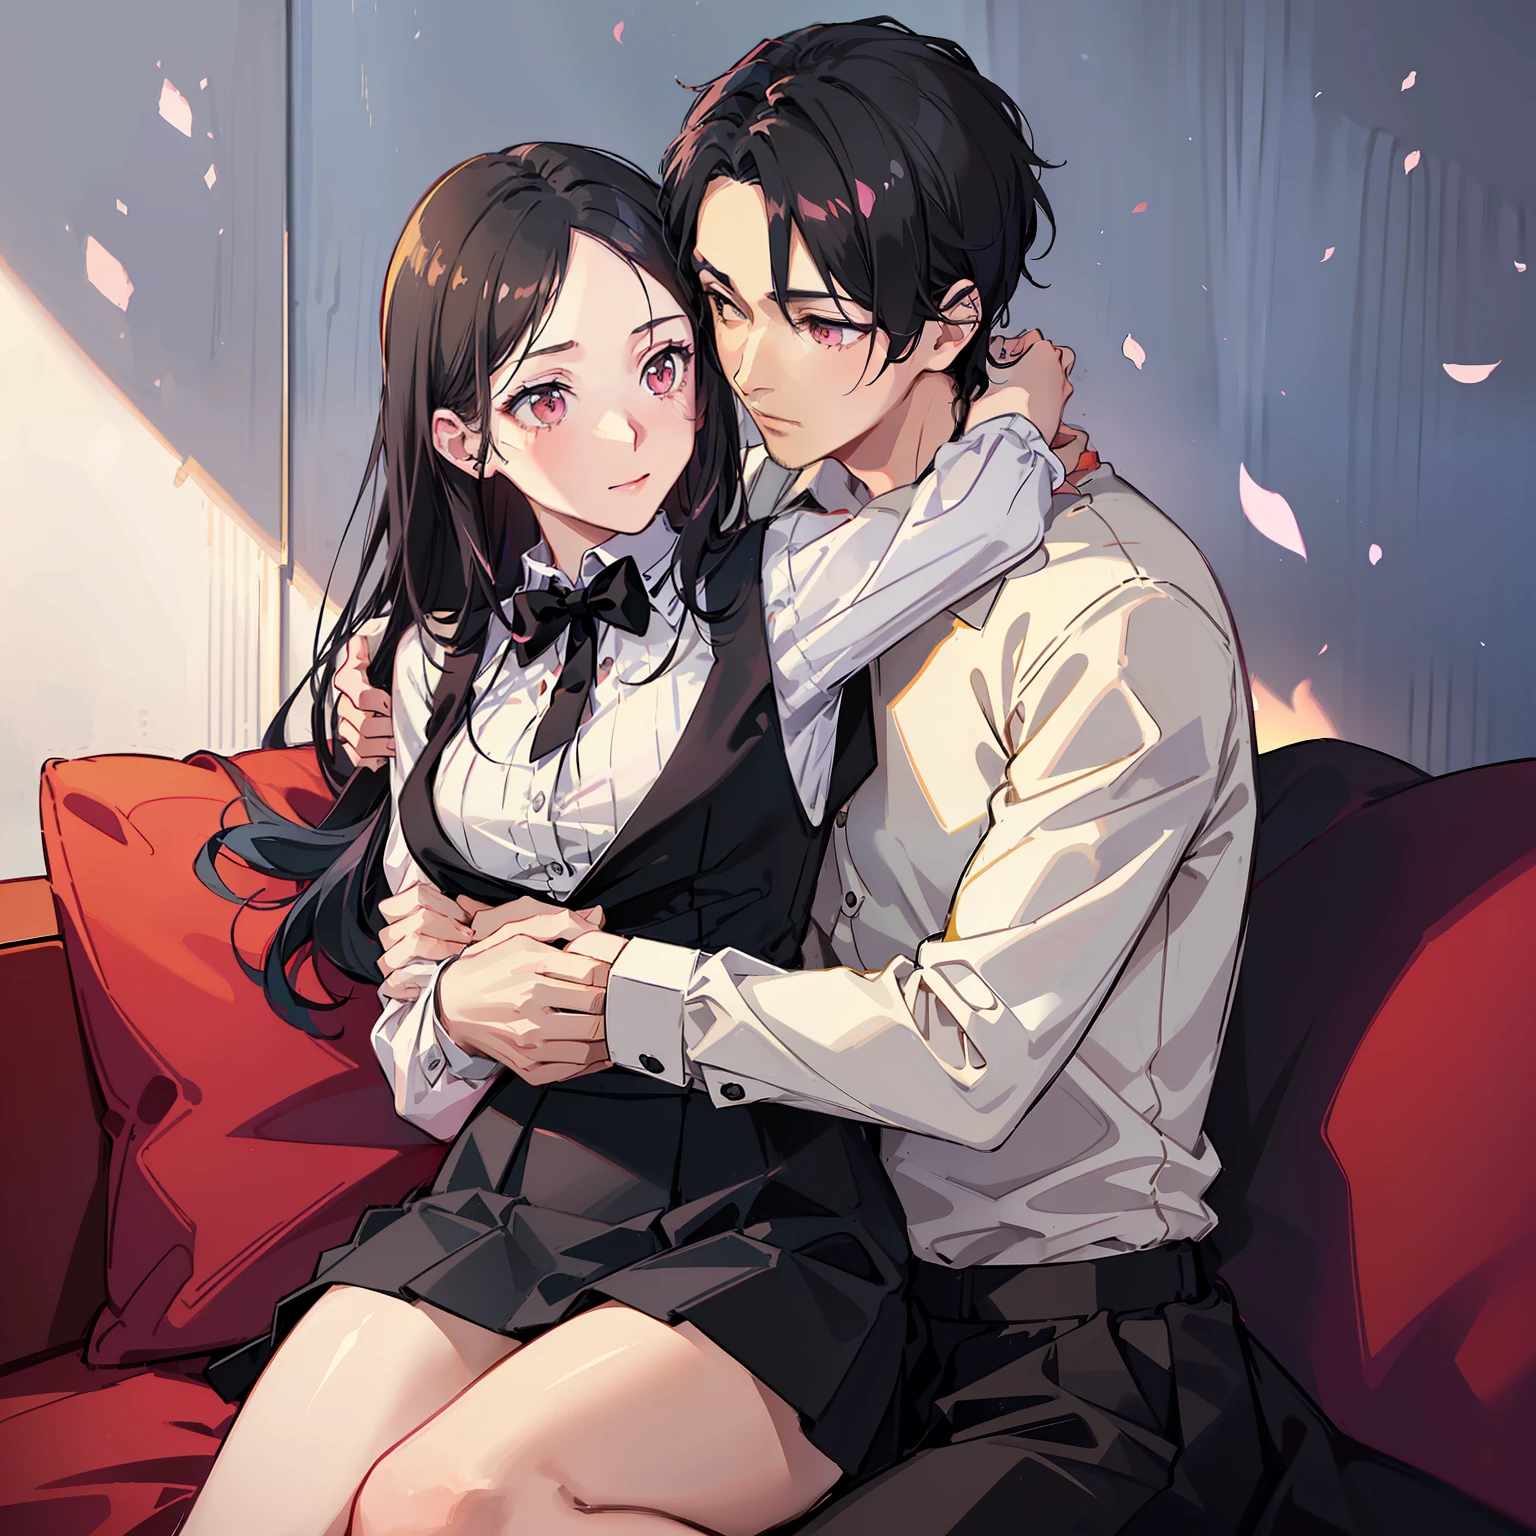 A couple in the sofa hug each other (1 woman: long black hair, no bangs, pink eyes, pink cheeks, makeup, wear a white shirt, black vest and black skirt, sit in a man’s laps),(1 man: short black hair, forehead hair, yellow eyes, handsome, wear black suit, wrap his arms around a woman’s waist)